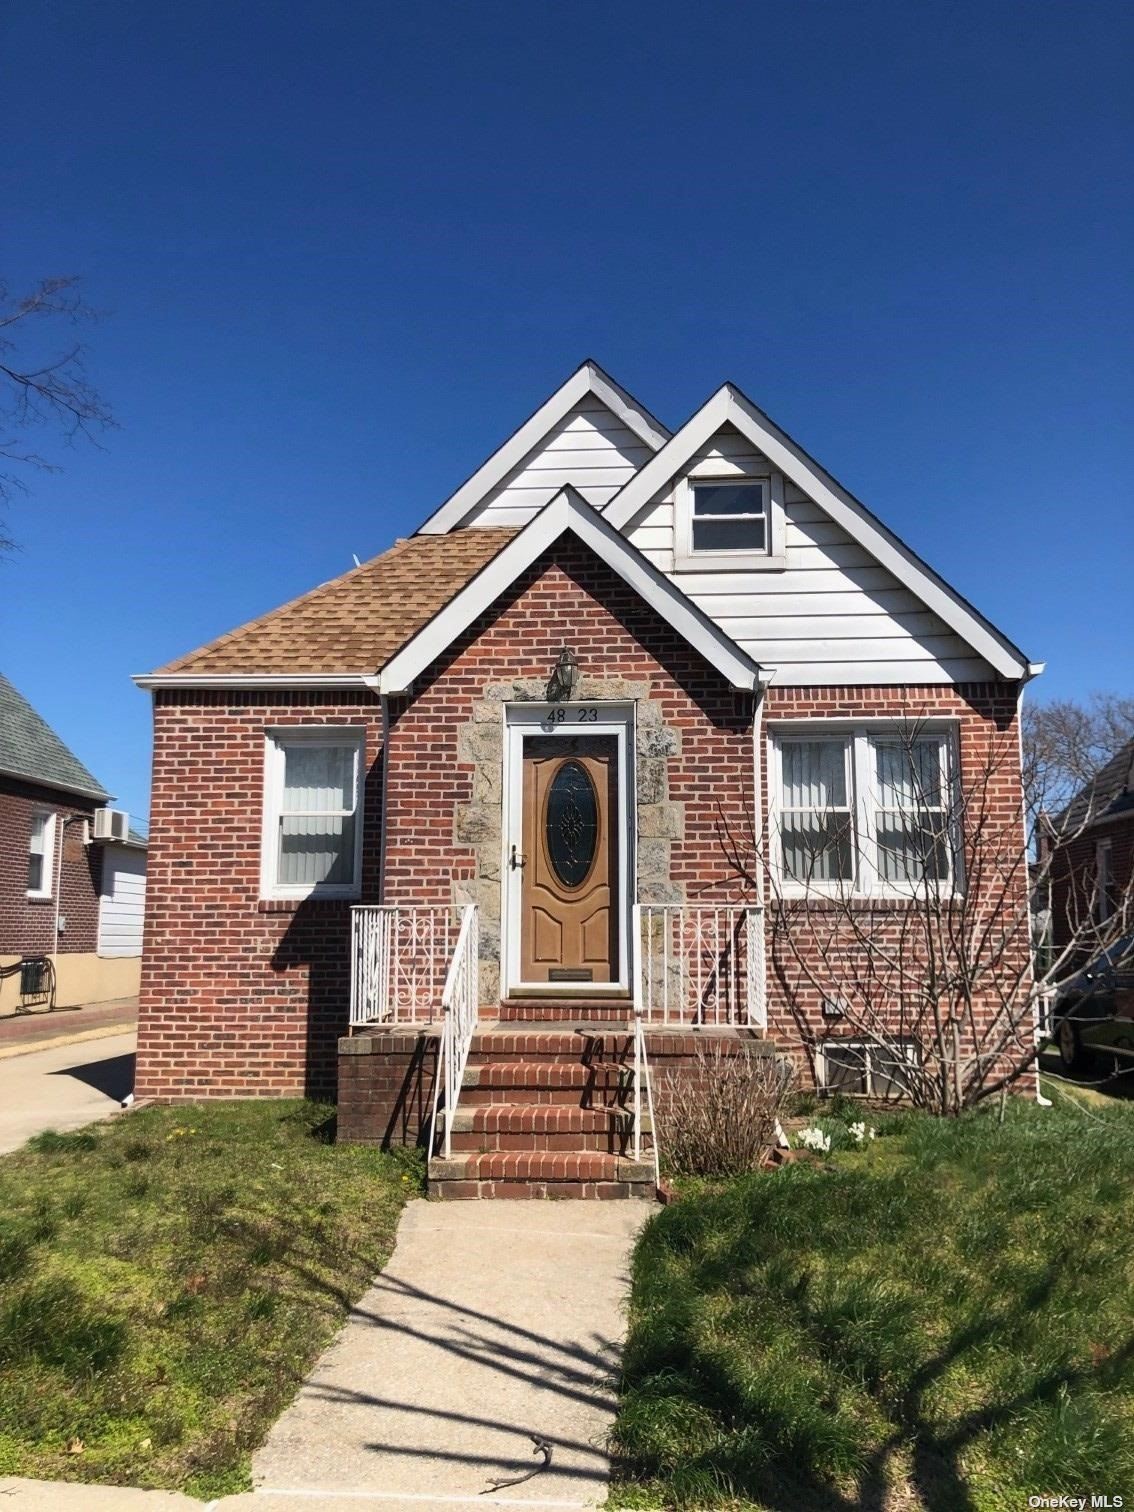 Single Family in Fresh Meadows - 193rd  Queens, NY 11365